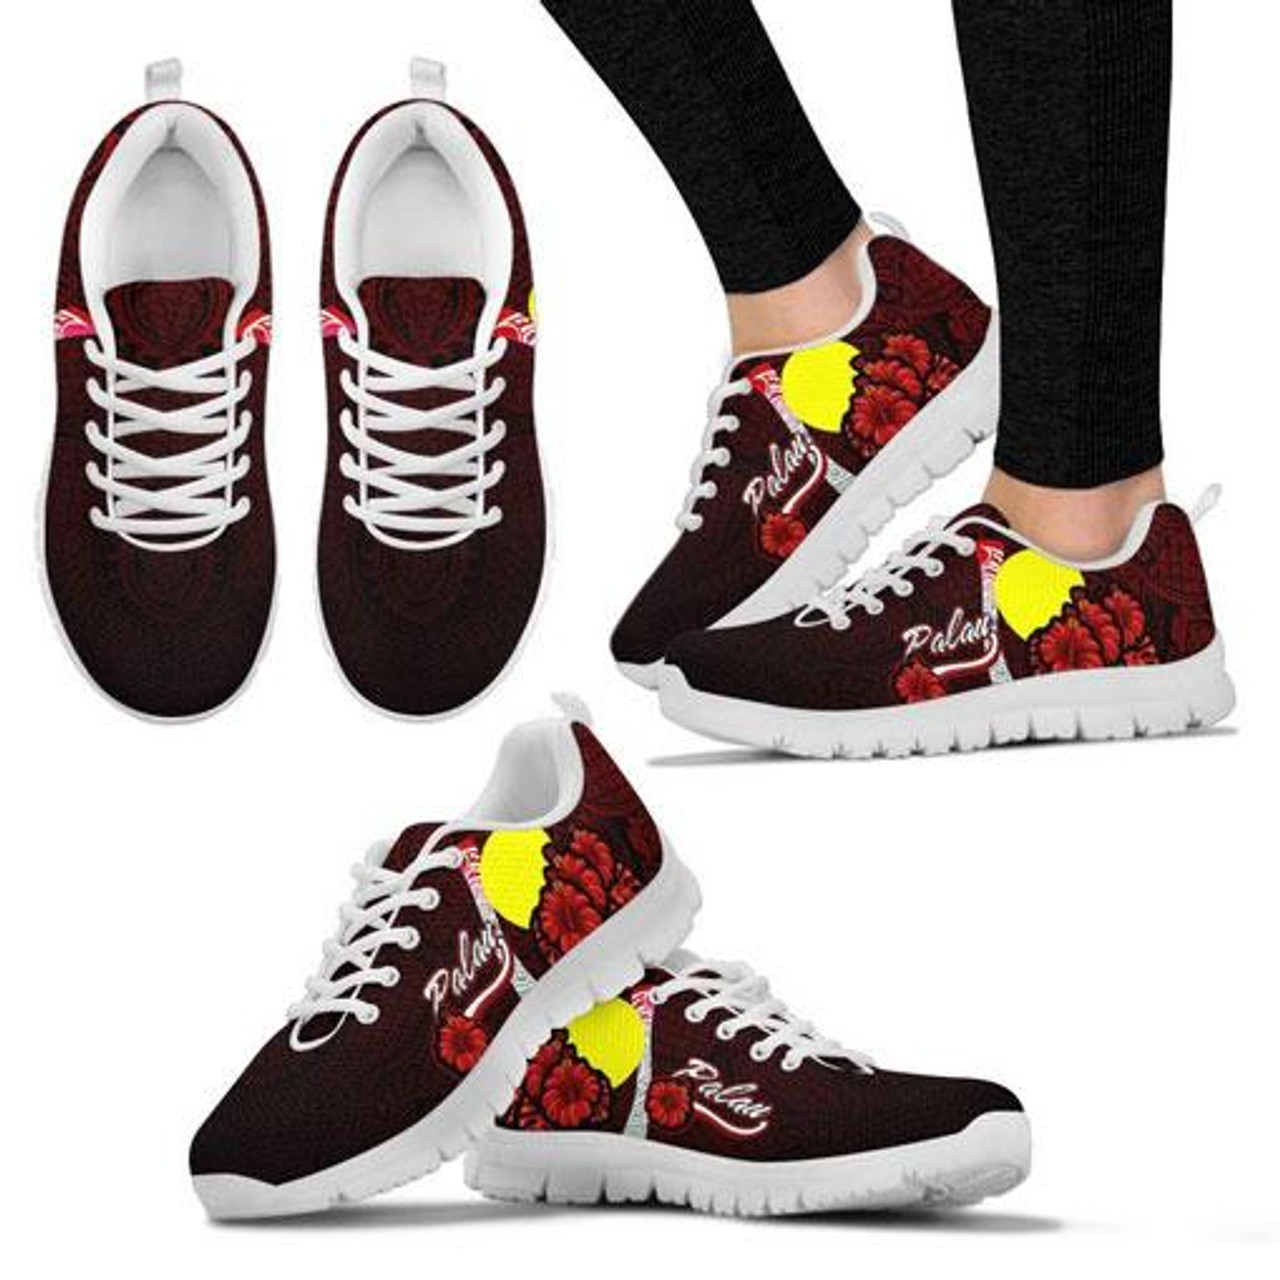 Palau Polynesian Sneakers - Coat Of Arm With Hibiscus 9